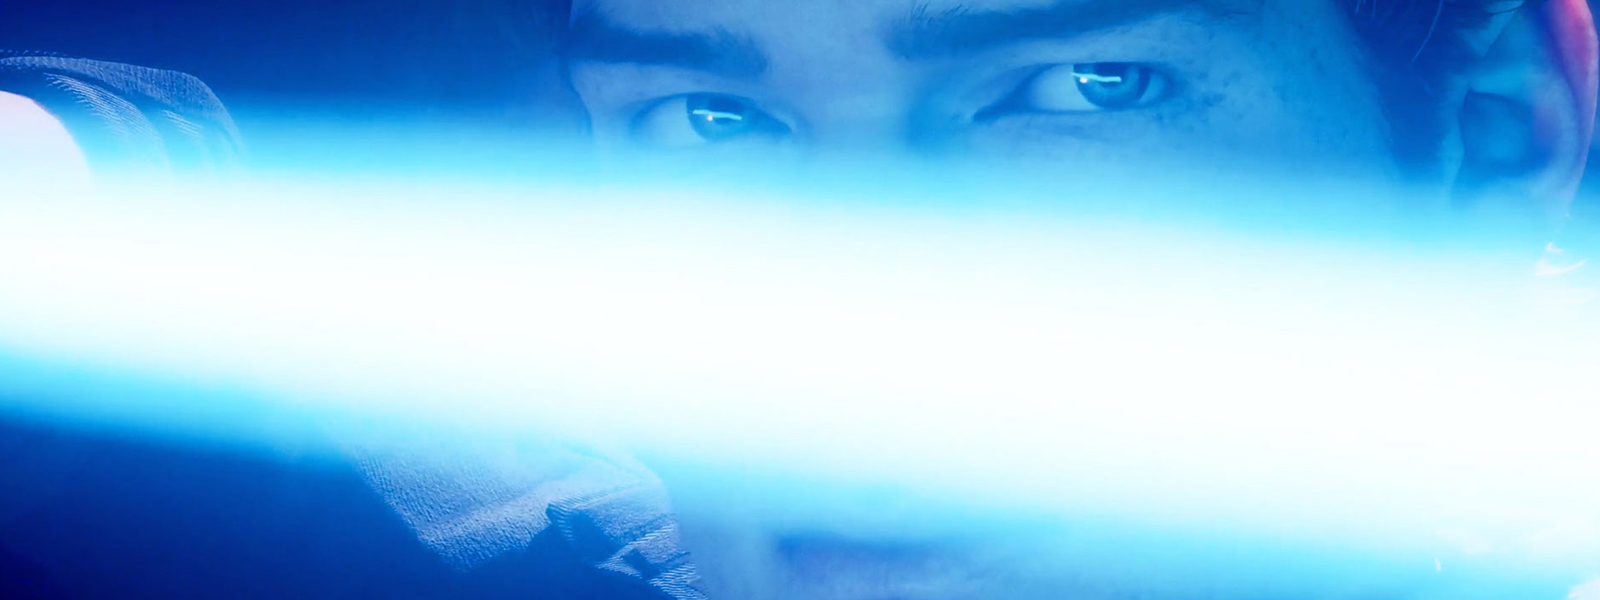 Close up of Cal Kestis holding a lightsaber in front of his face